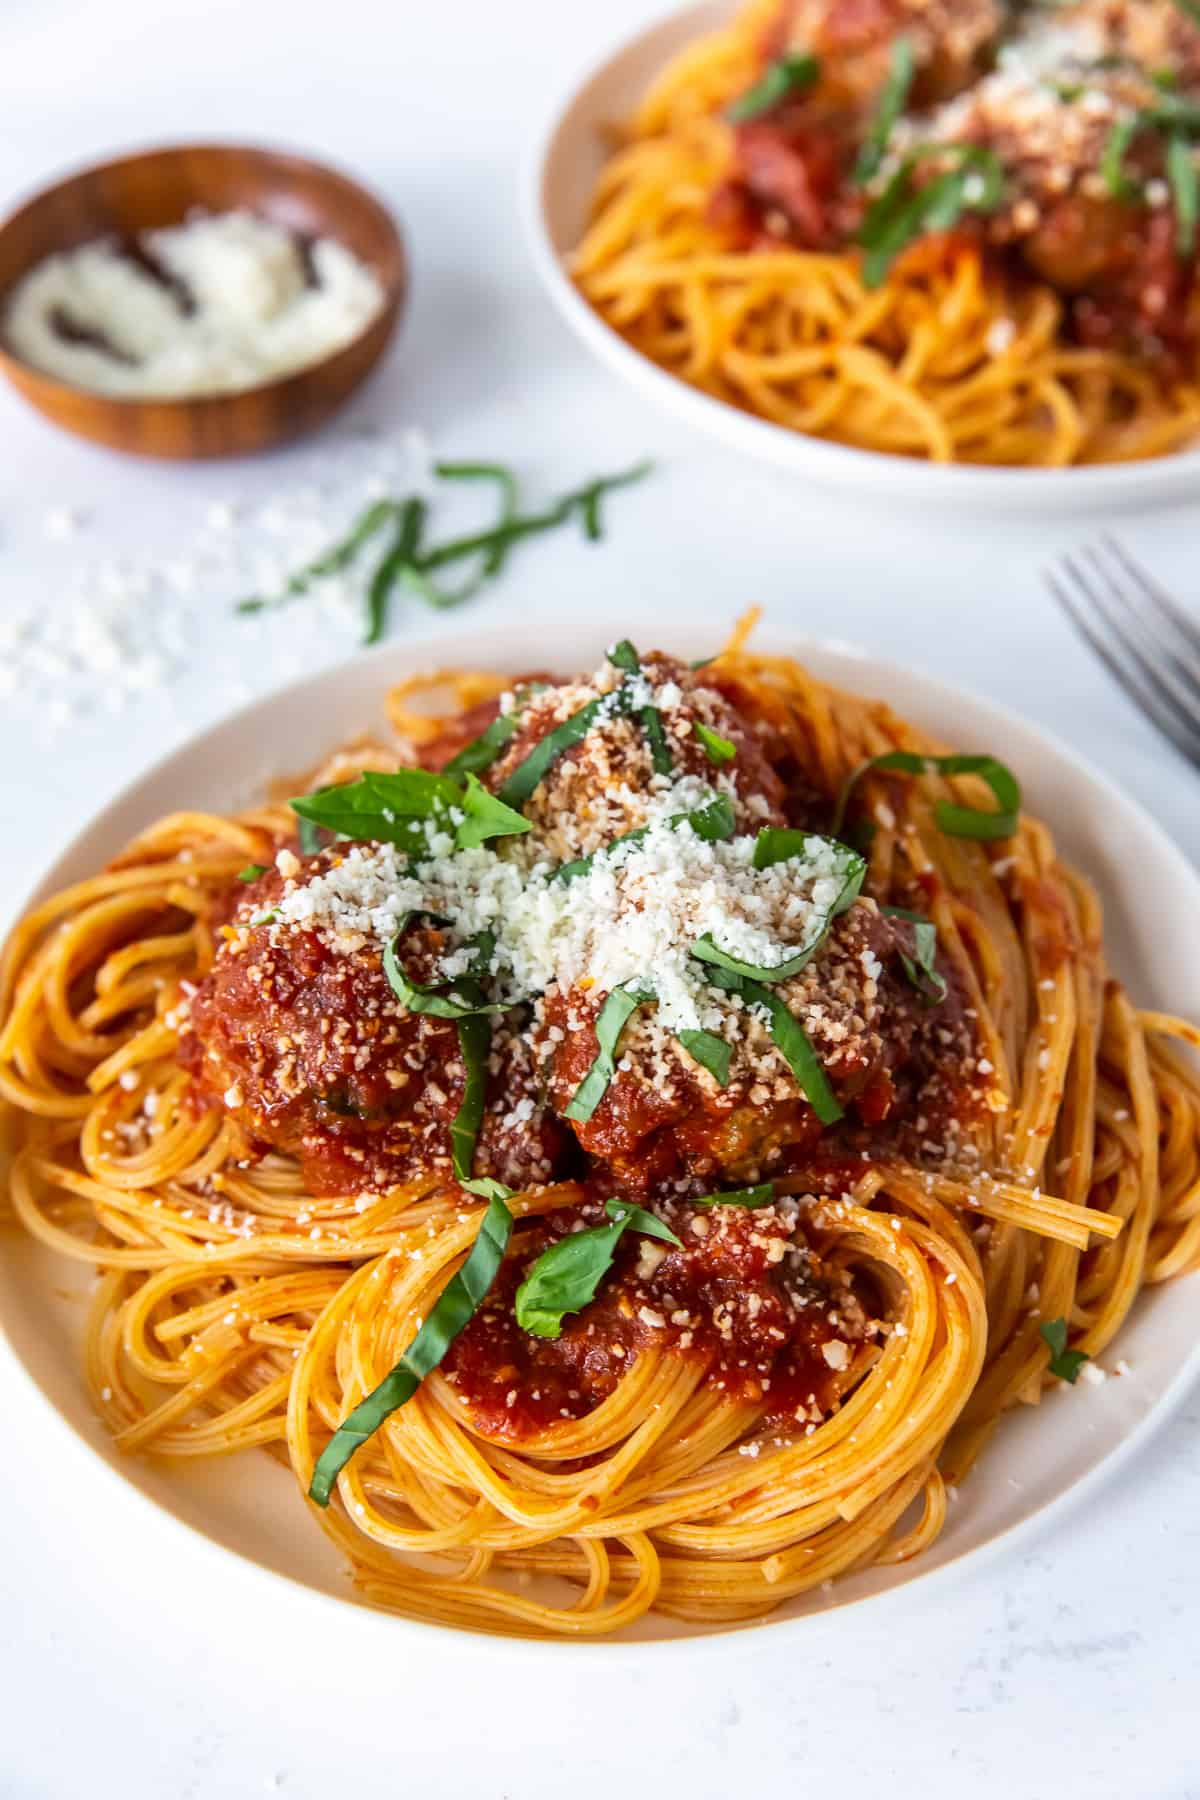 A dinner plate filled with homemade spaghetti and meatballs topped with basil and Parmesan.